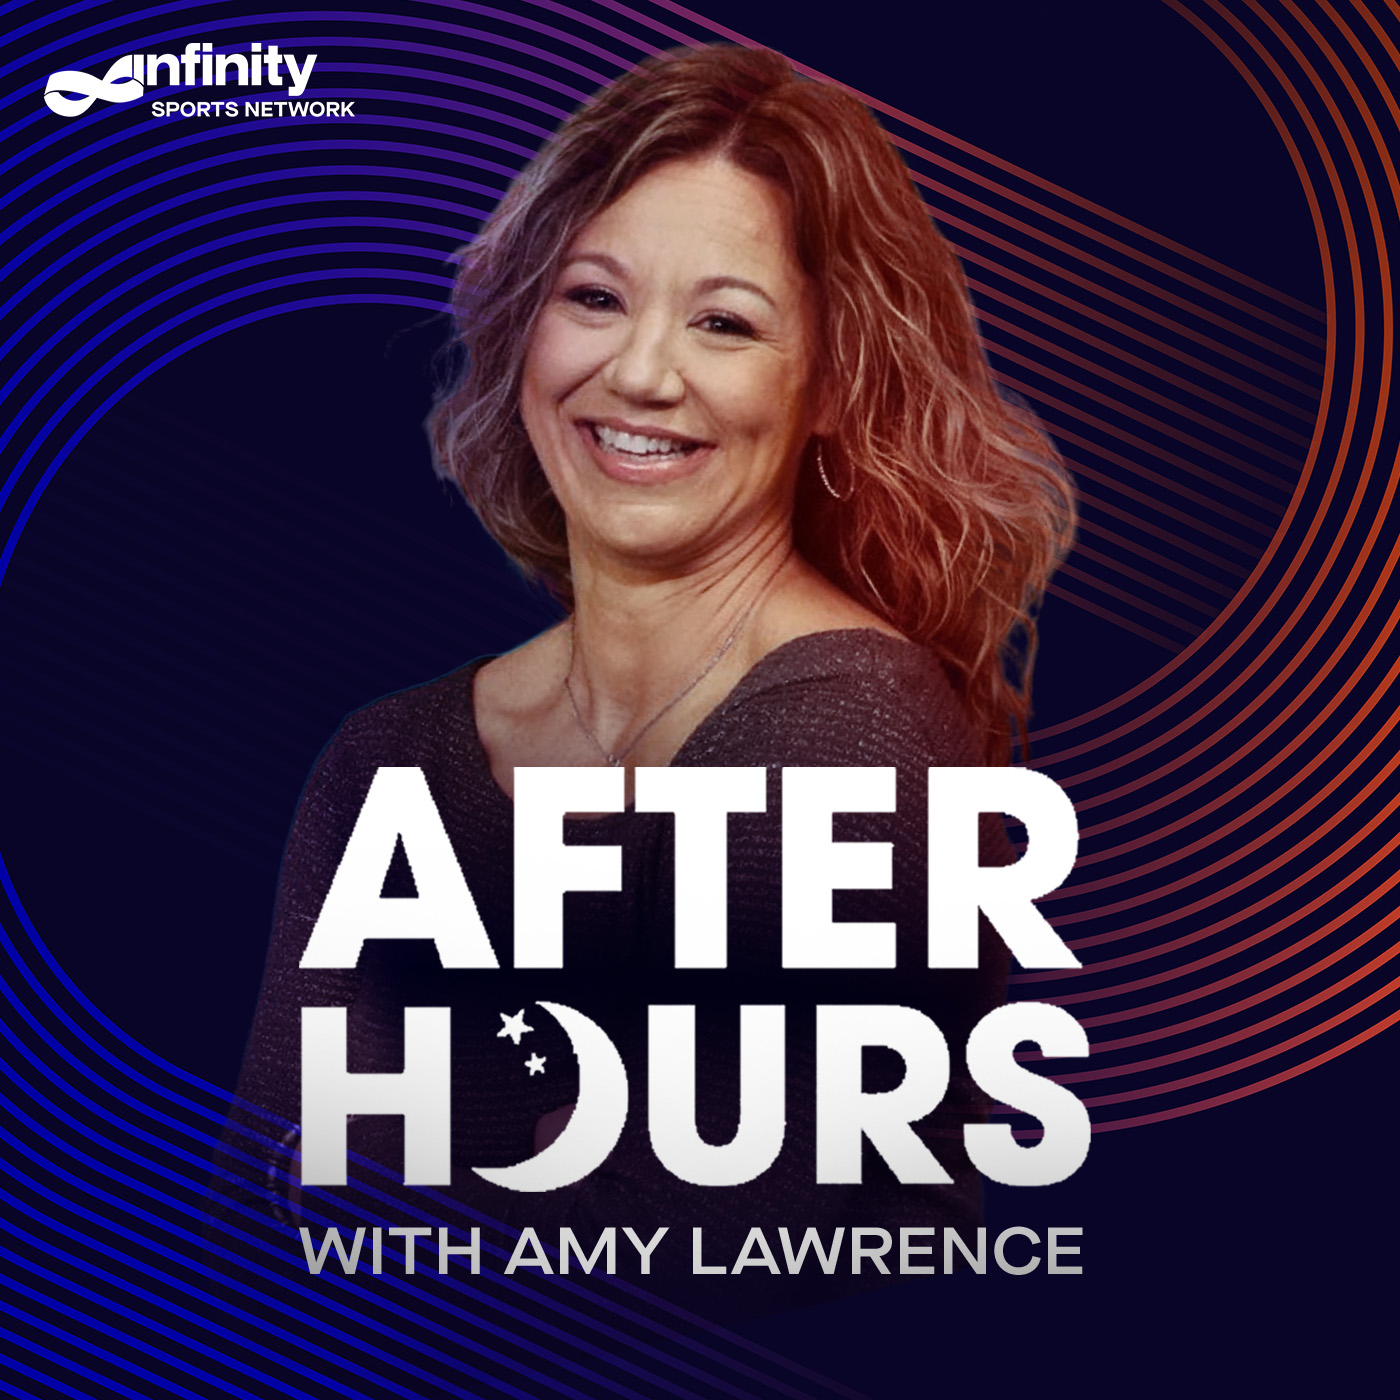 6/11/21 After Hours with Amy Lawrence PODCAST: Hour 4